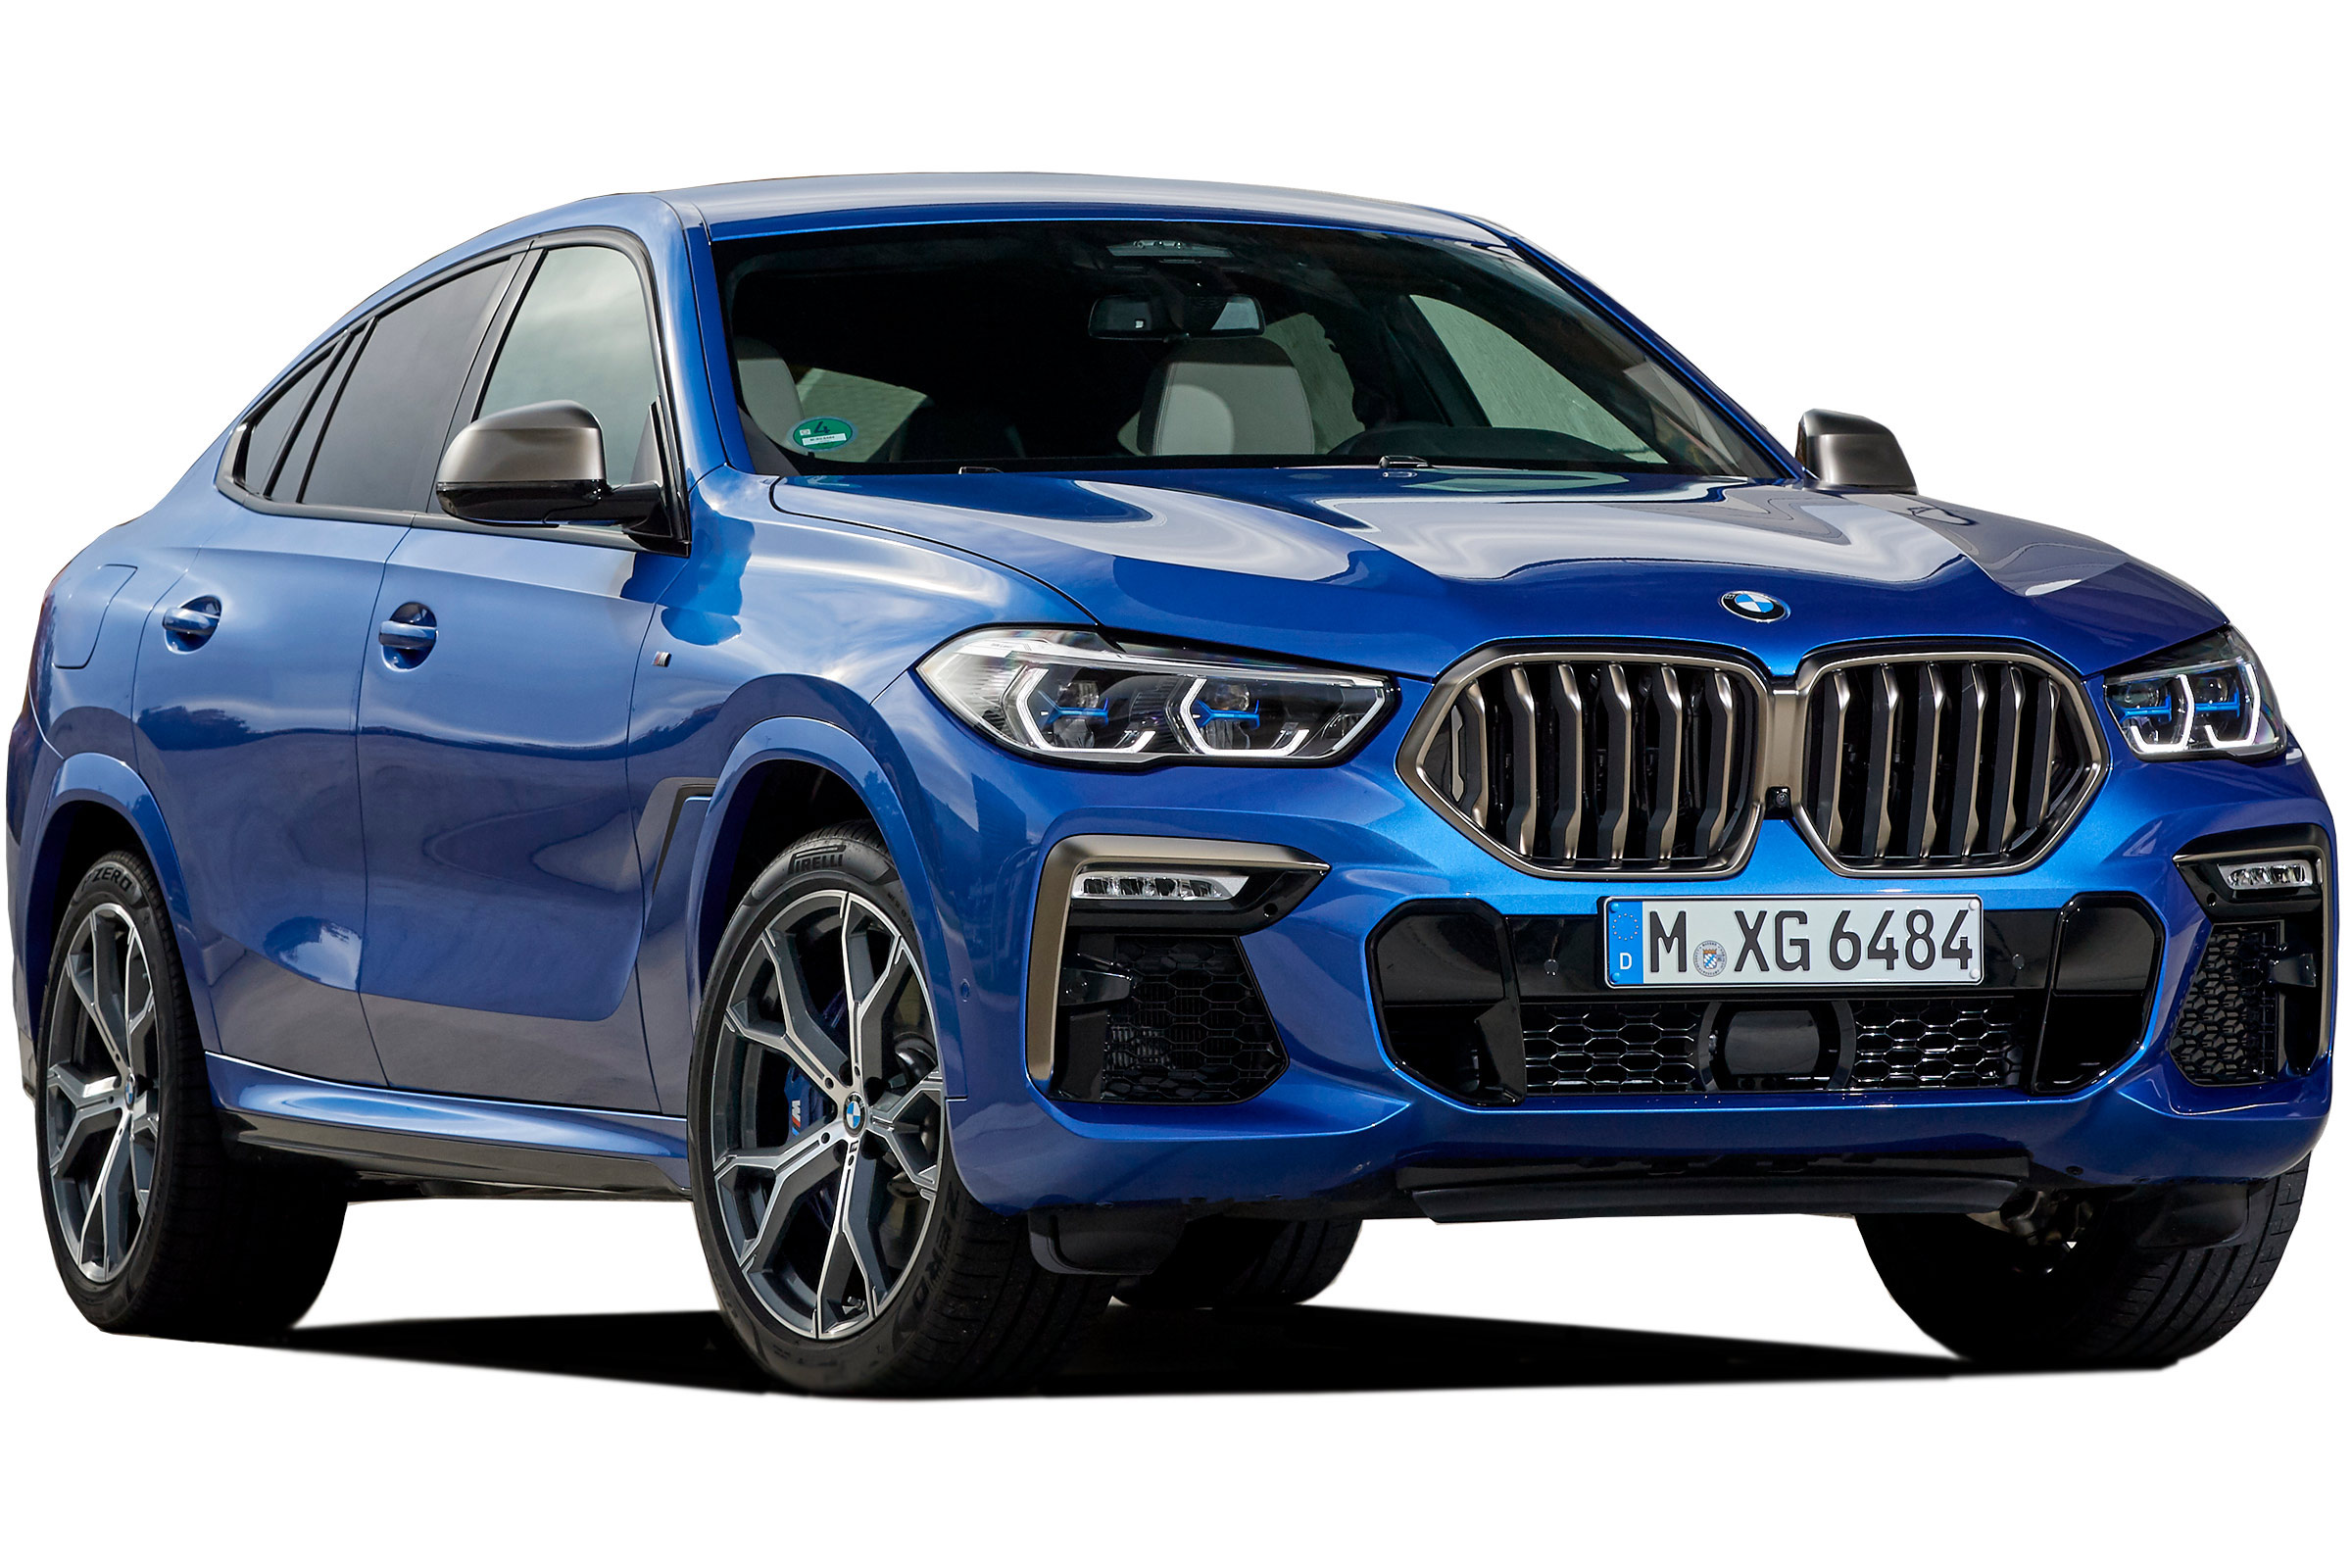 Bmw X6 Suv Review Carbuyer